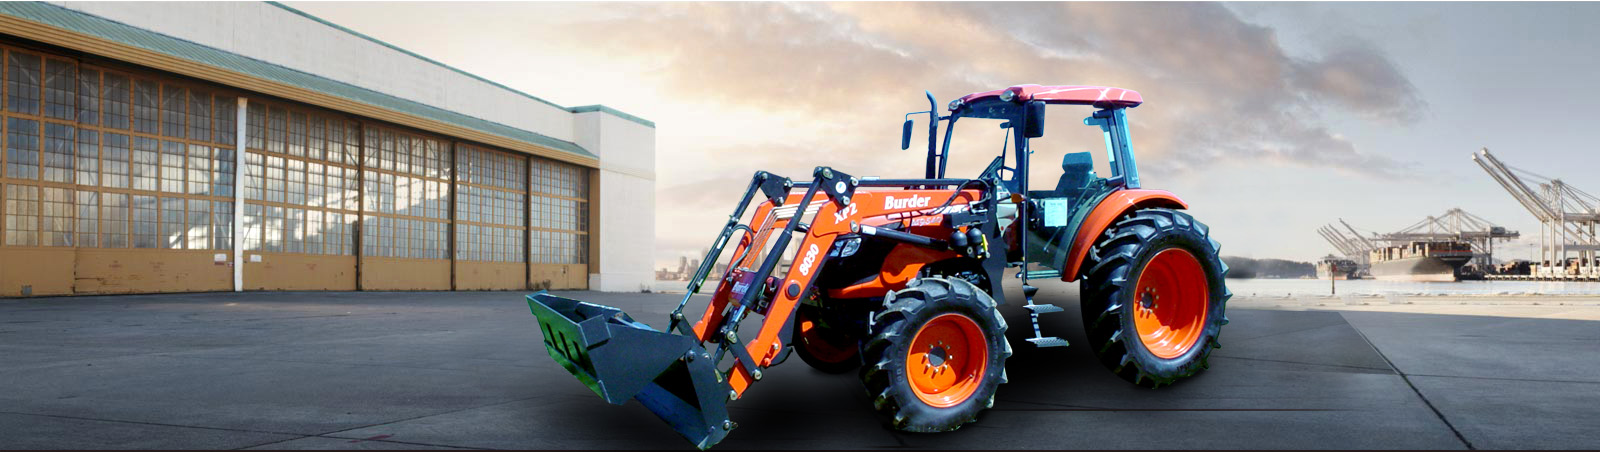 <h2>Burder Industries India Pvt Ltd</h2> <p>We are proud of our extensive range of agricultural implements and equipment and our long history of manufacturing excellence</p>